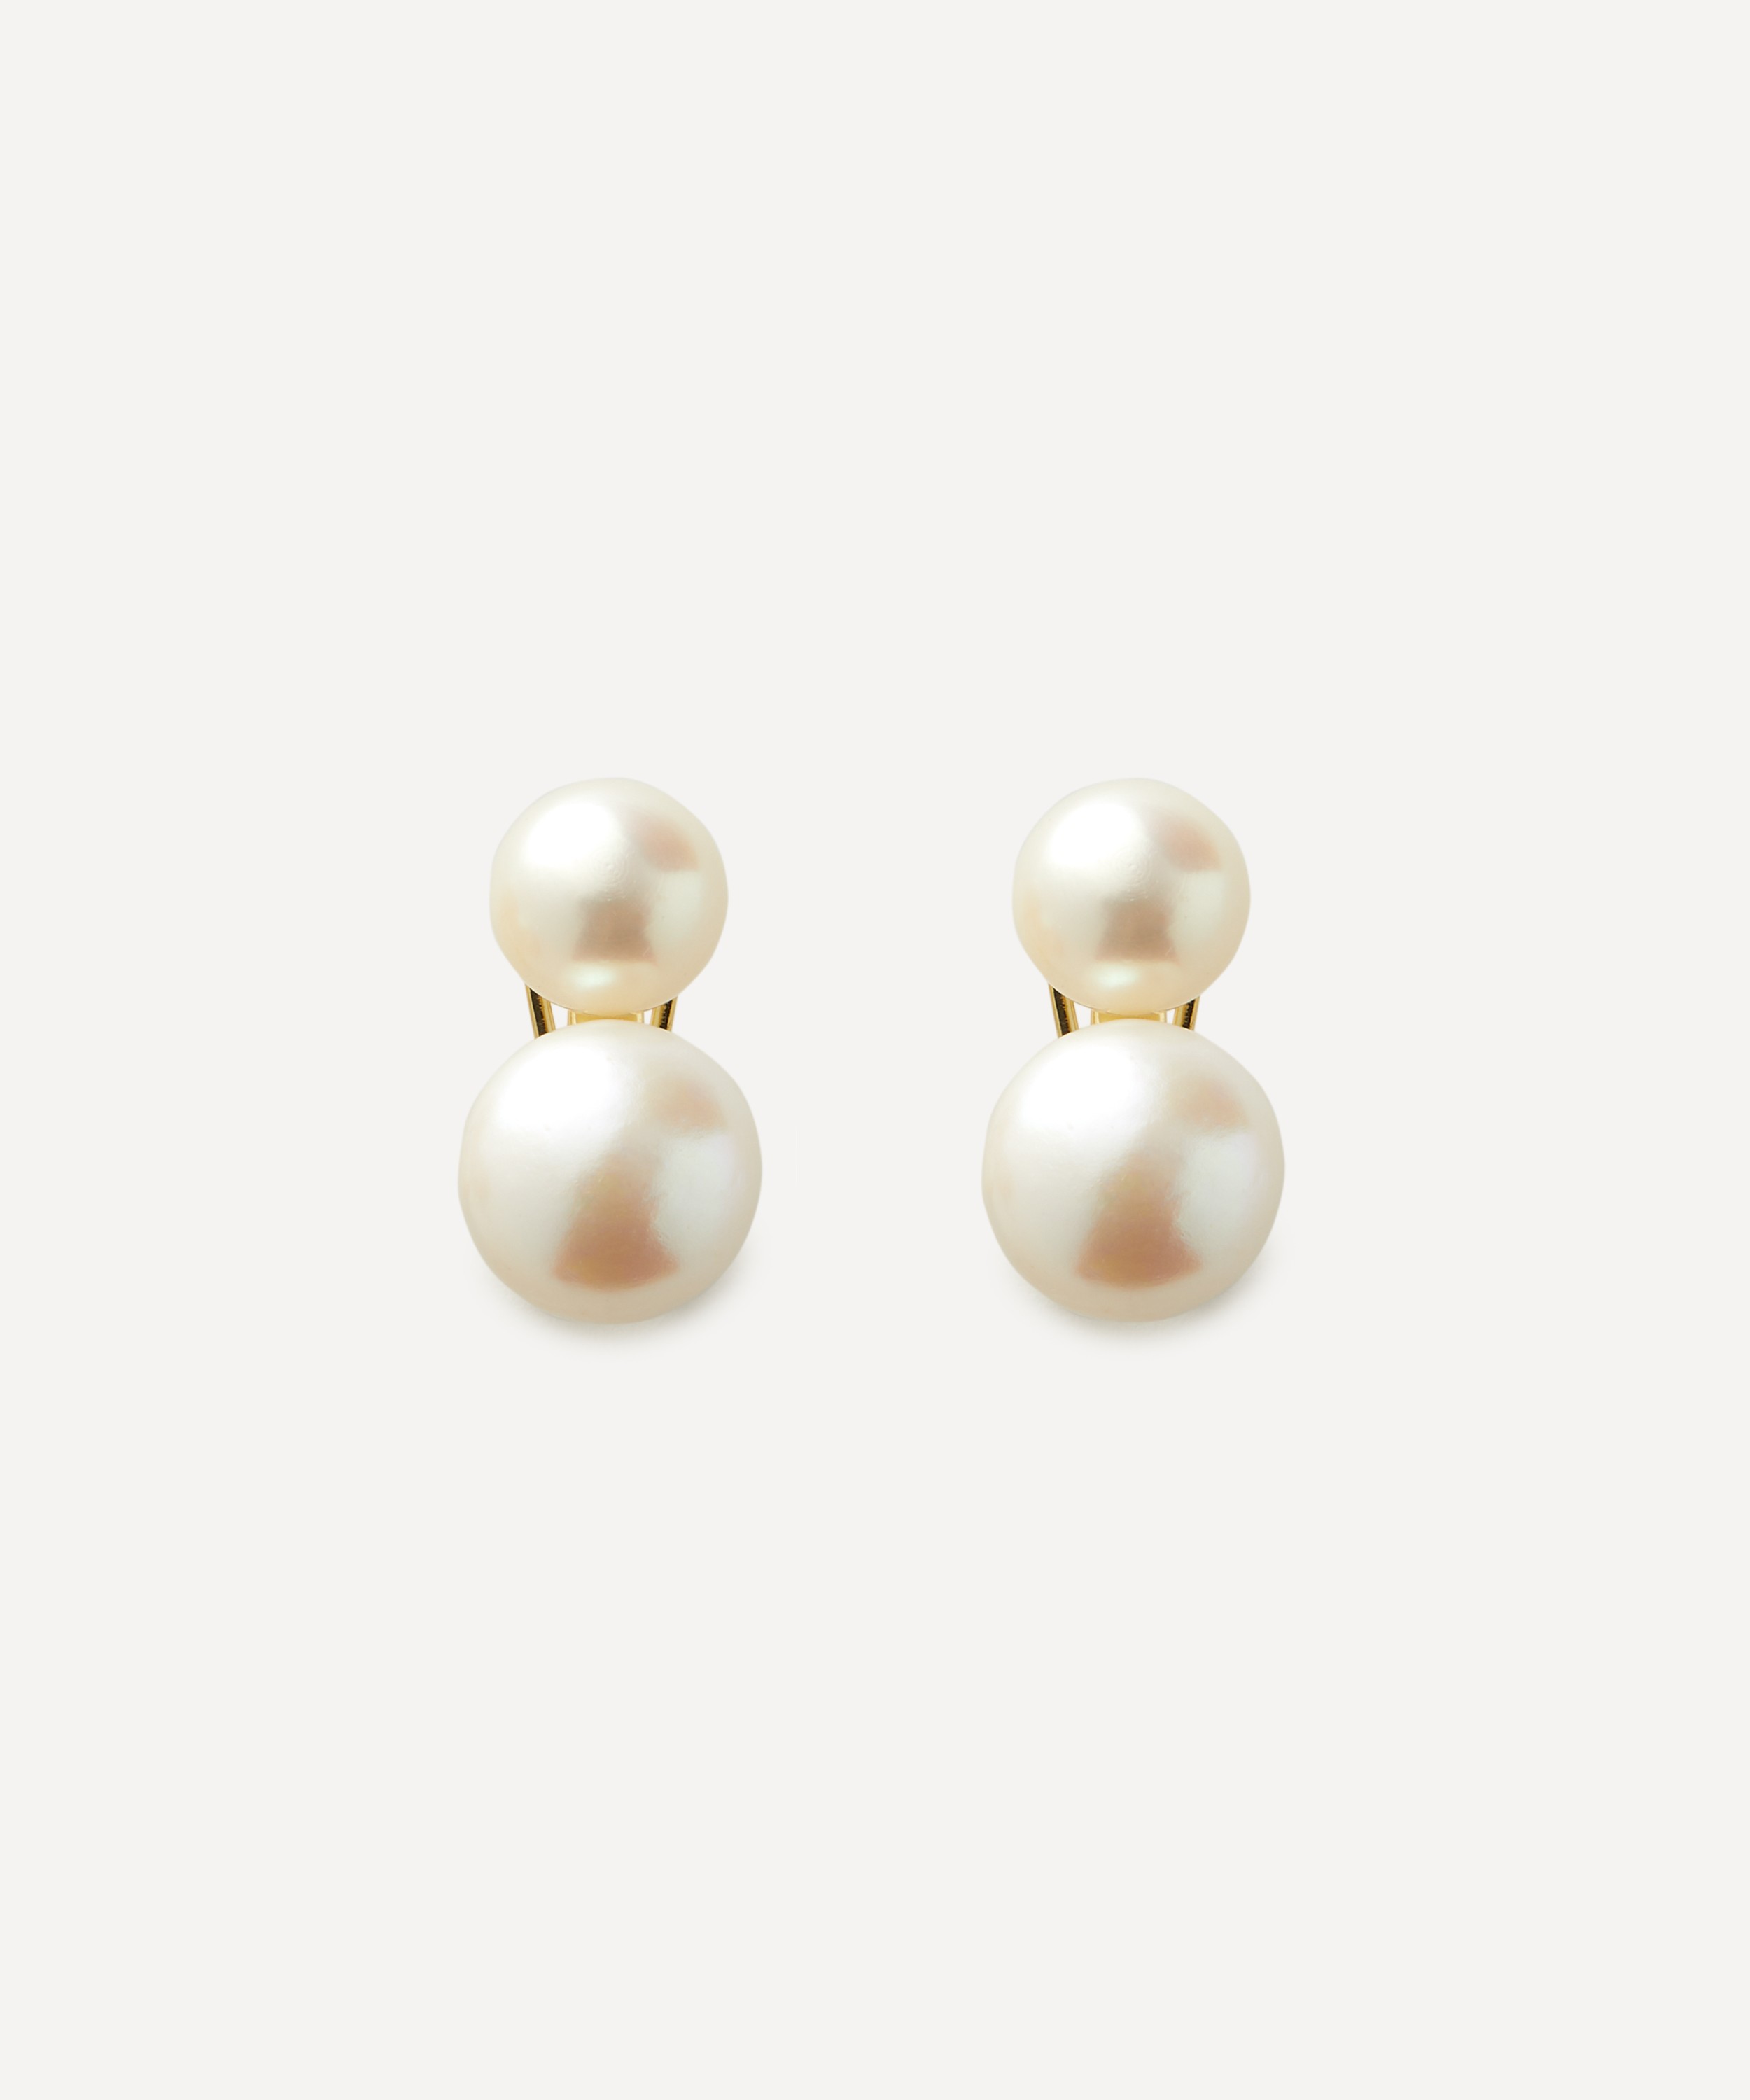 SHASHI - 14ct Gold-Plated Bianca Pearl Stud Earrings